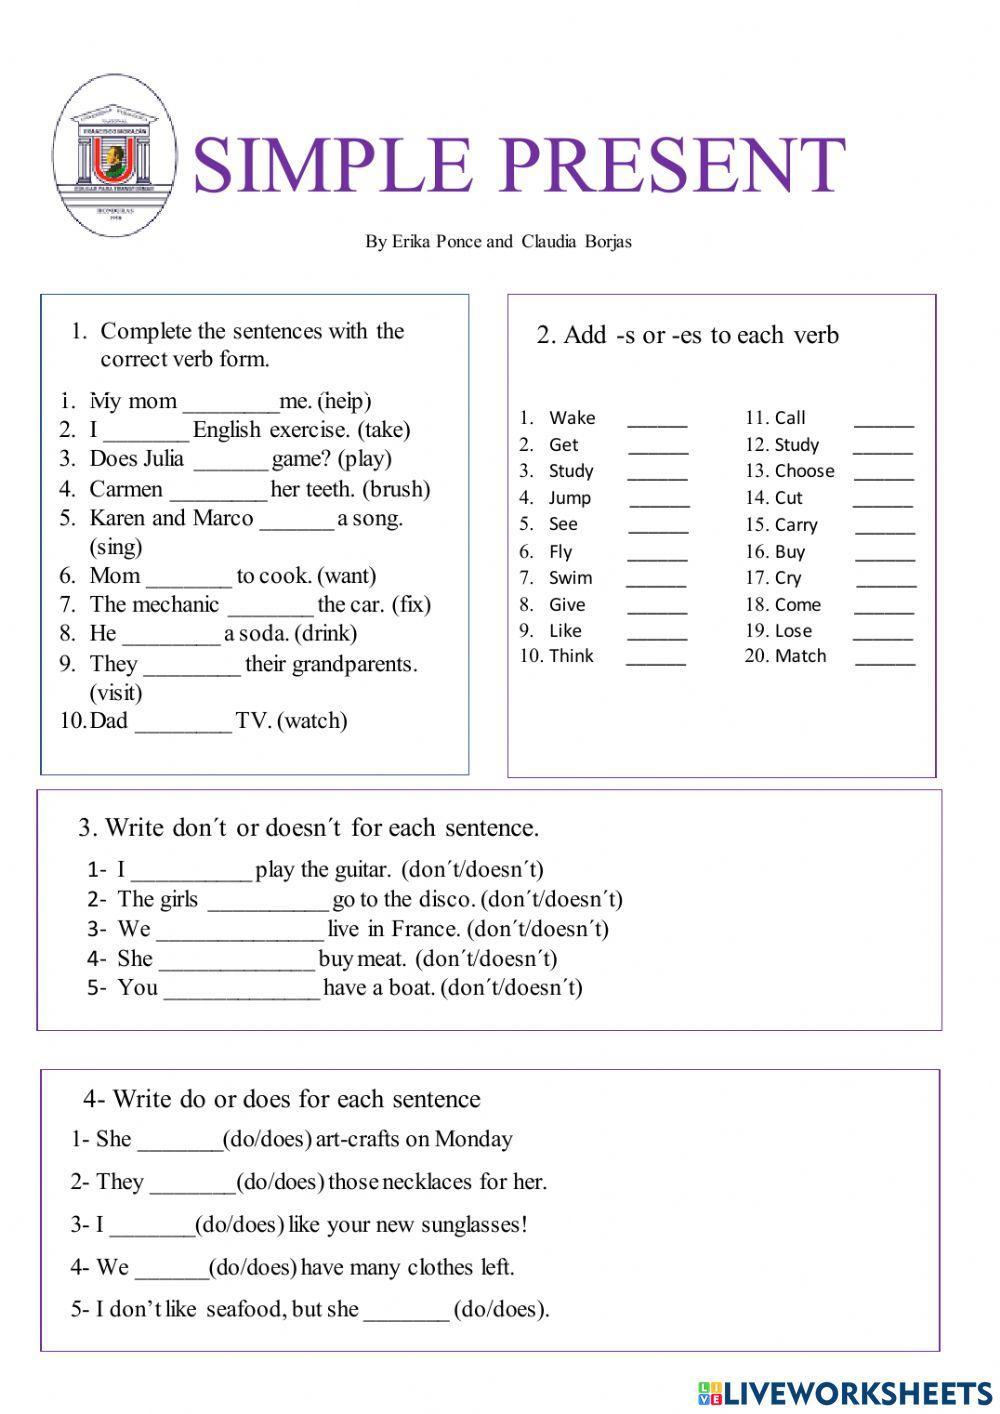 Simple Present Tense online exercise for Elementary | Live Worksheets